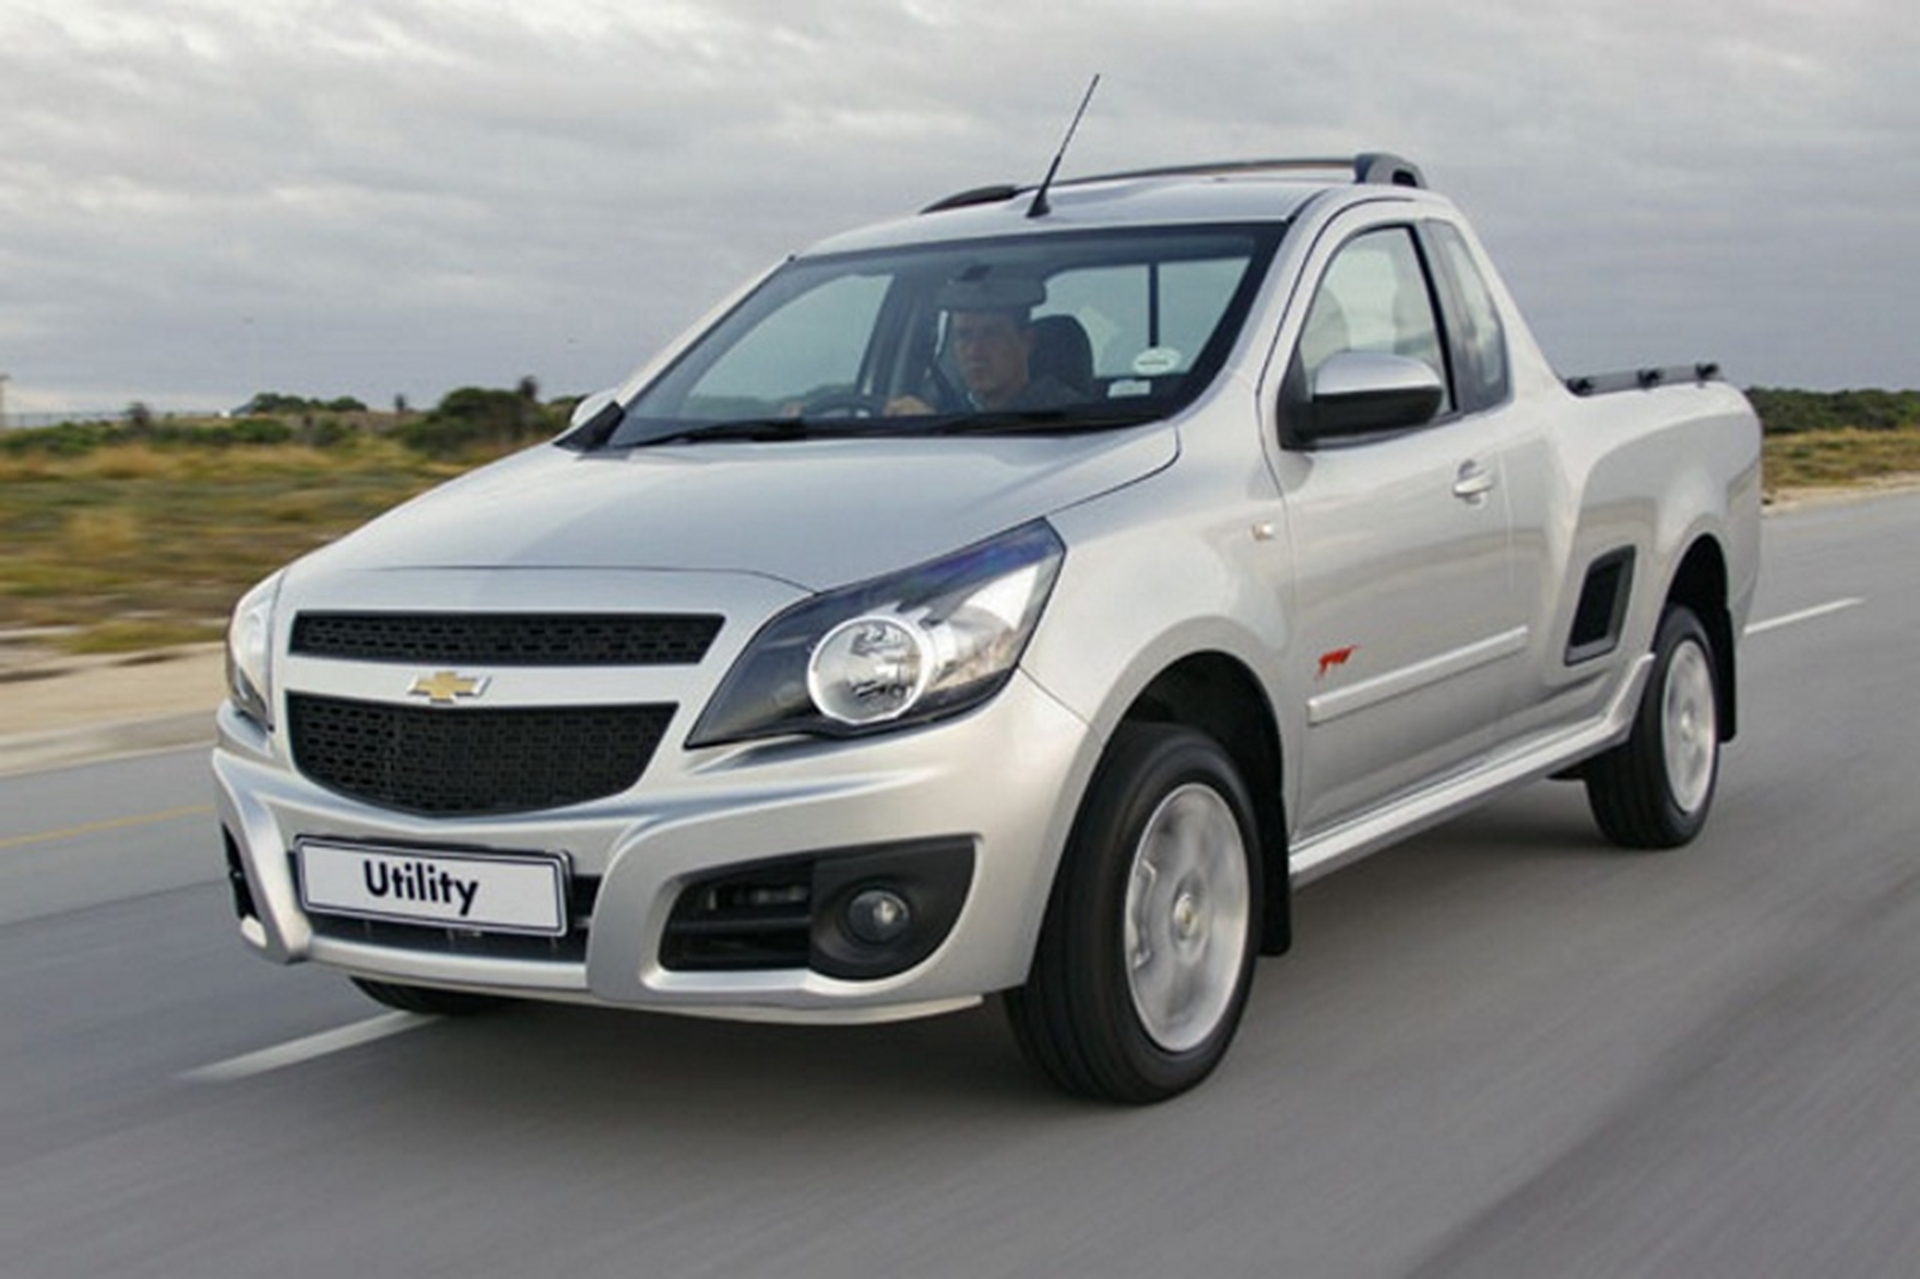 Developing the new Chevrolet Utility to satisfy exacting market requirements